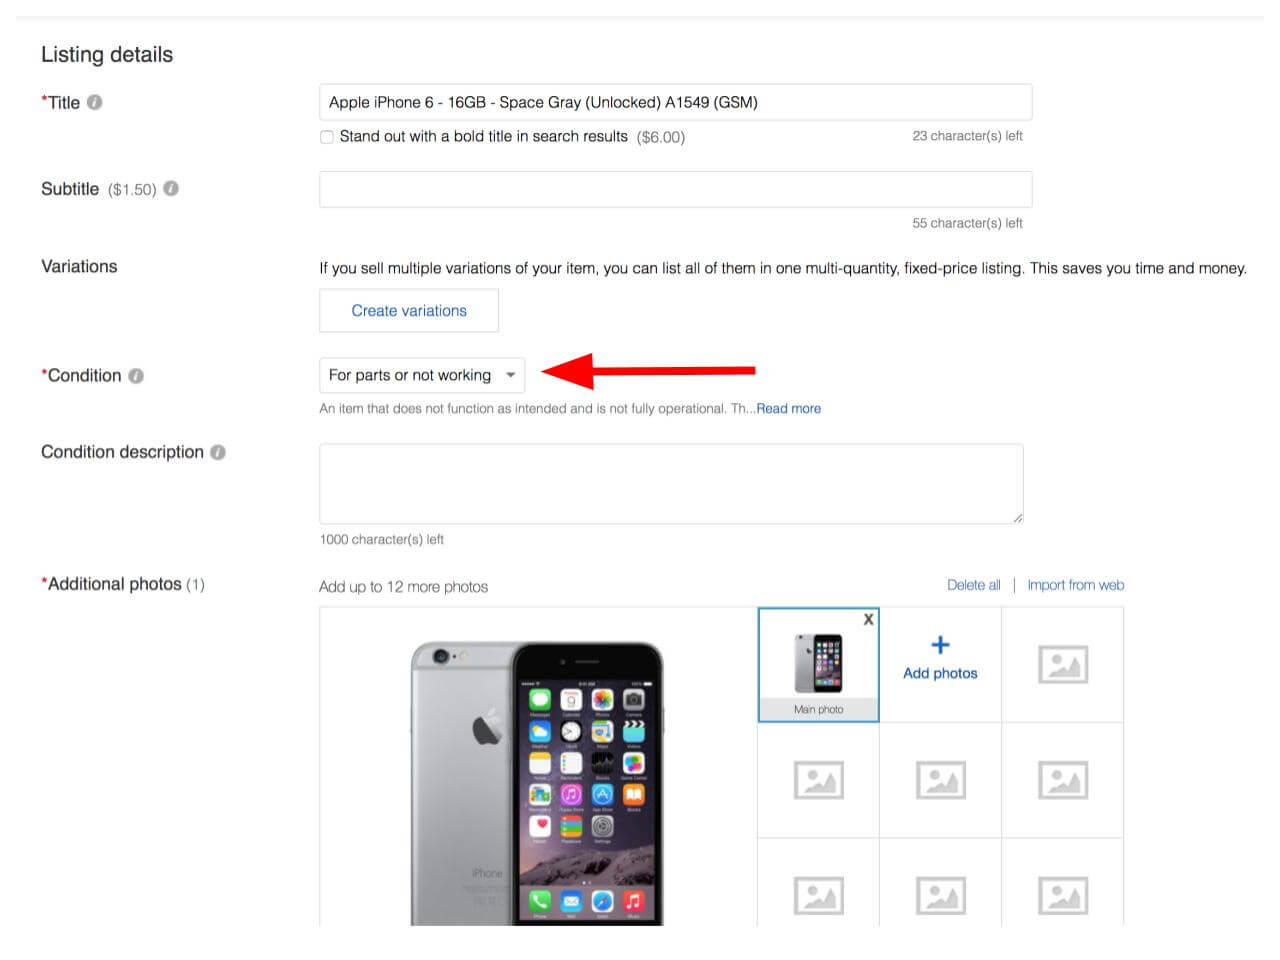 To sell a cracked iPhone on eBay, select the "For parts or not working" condition category.